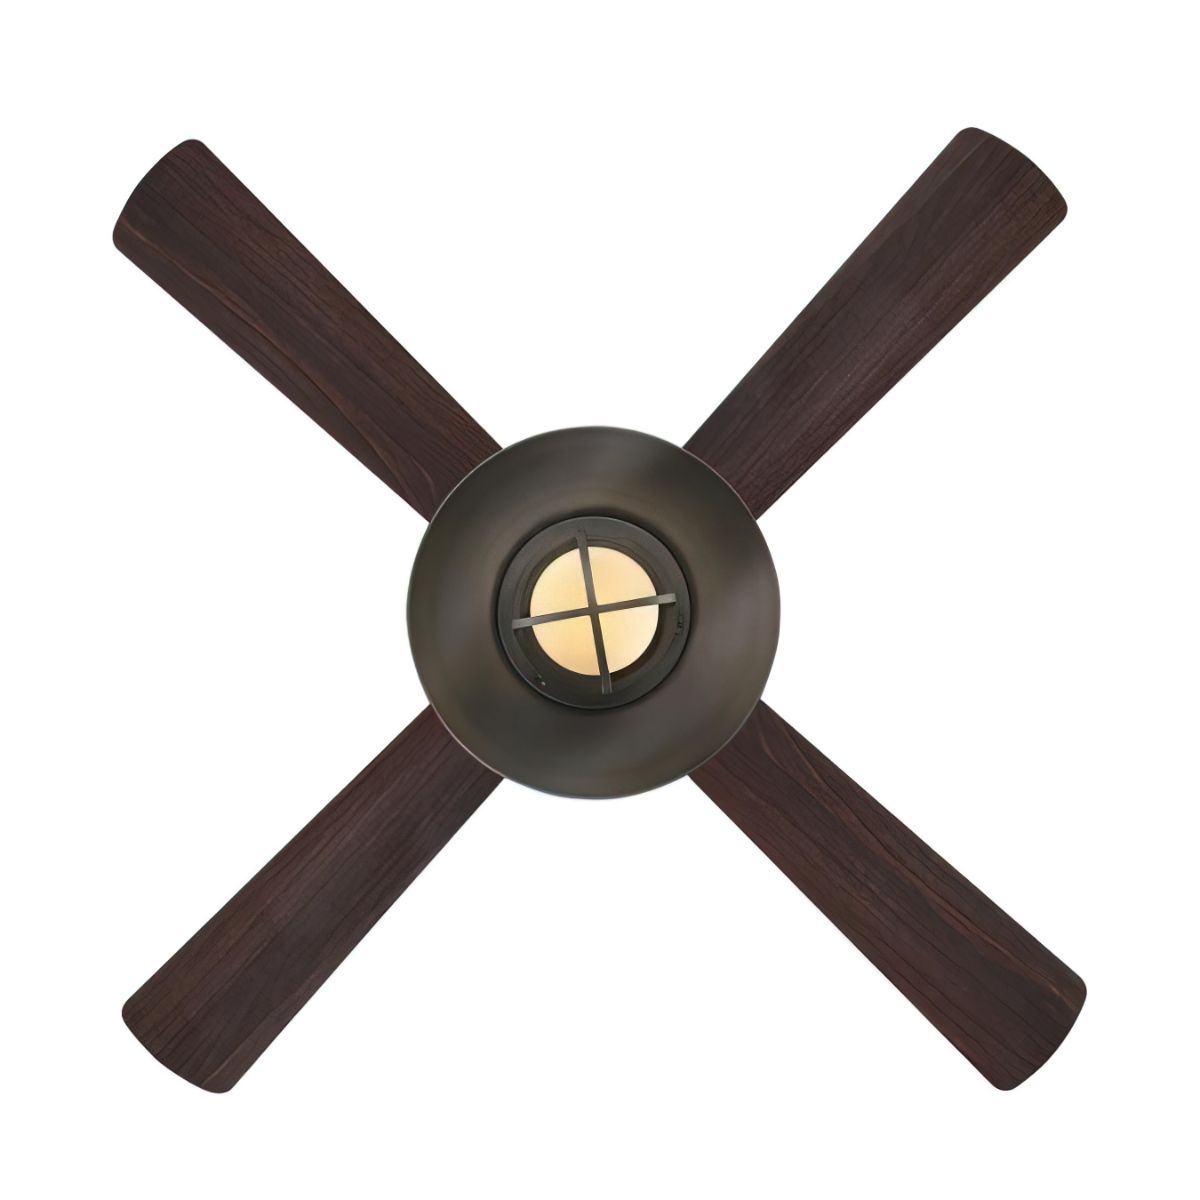 Porto 52 Inch Rustic Caged Ceiling Fan With Light And Remote